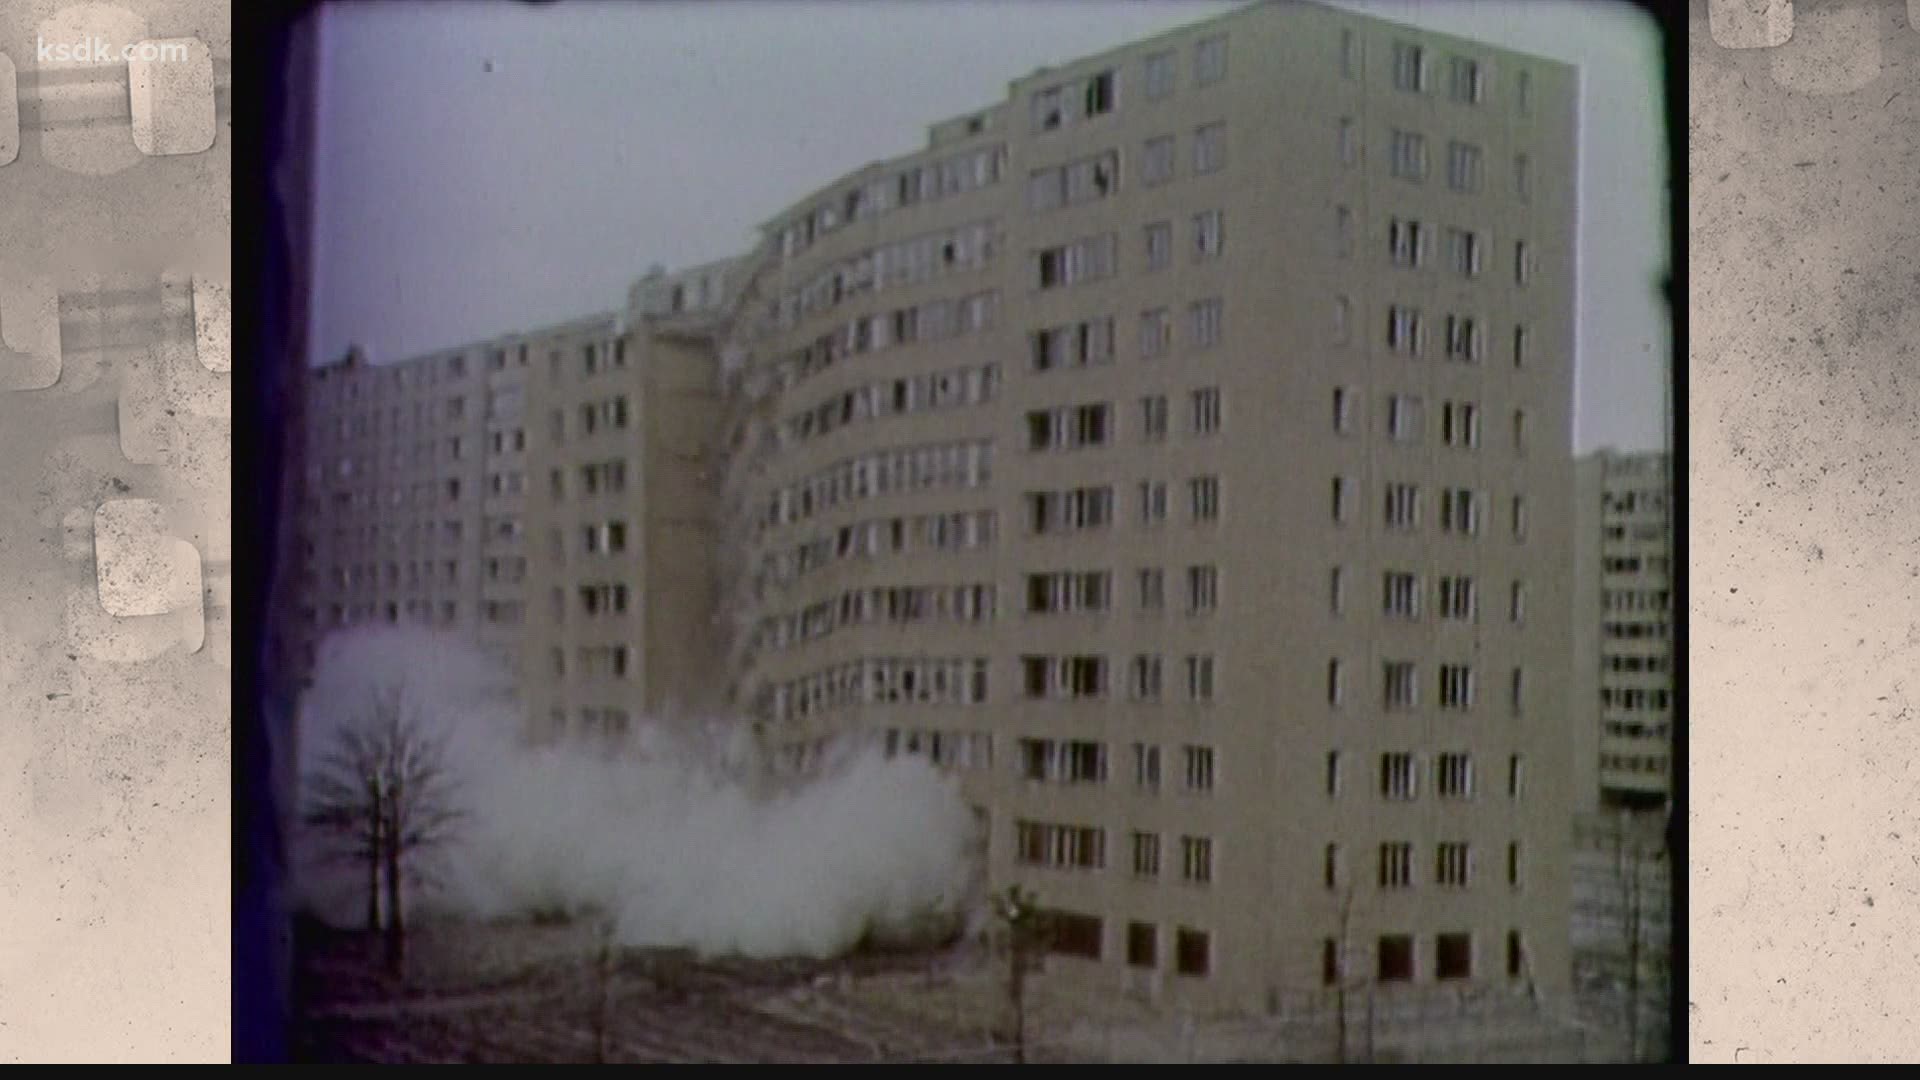 Named for an African American fighter pilot and a former U.S. Congressman, the Pruitt-Igoe Apartments was one of the largest public housing complexes in the country.